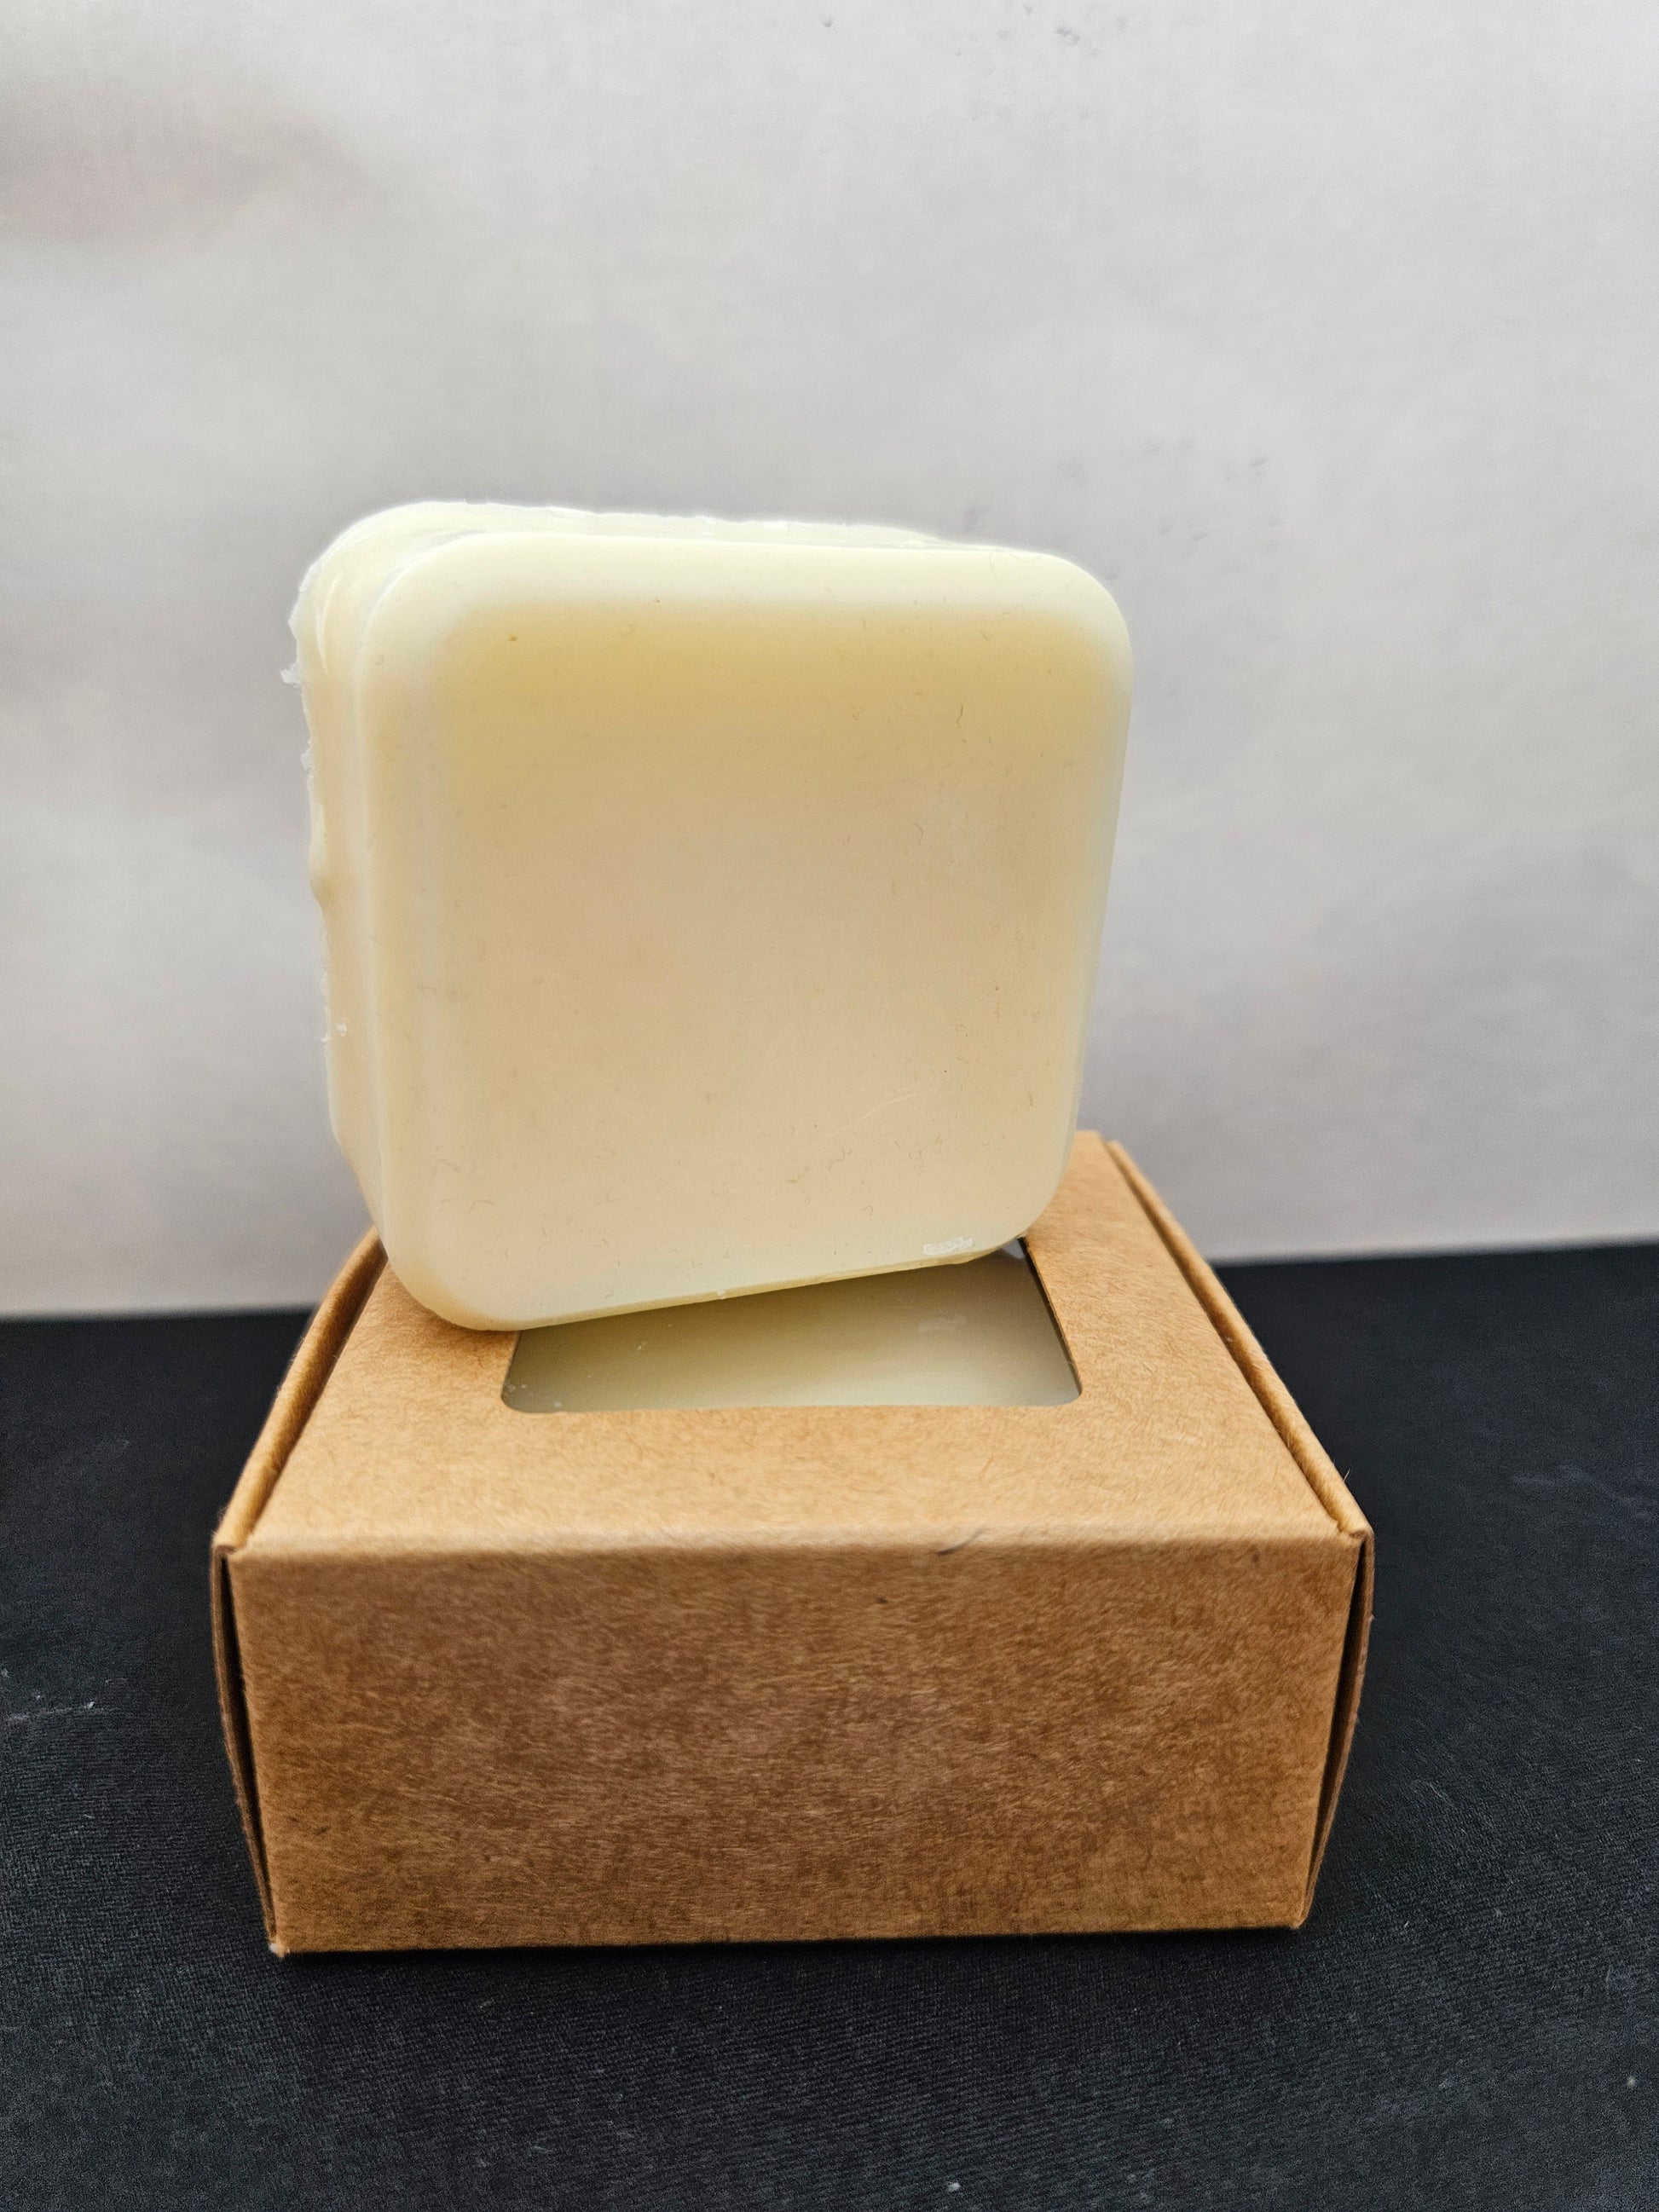 conditioner bar and box